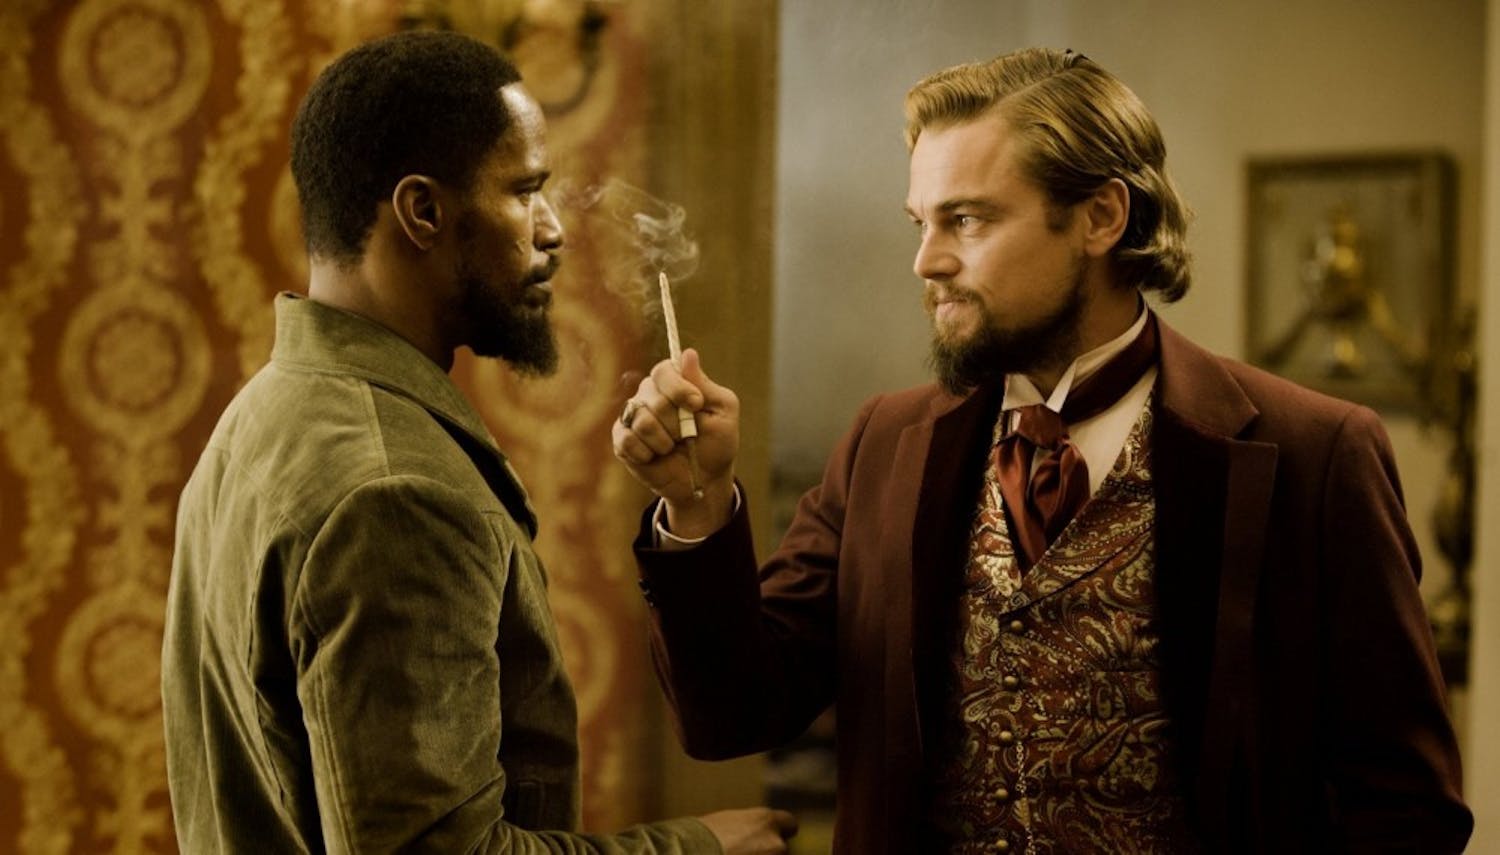 	‘Django Unchained’ gets four out of four stars for a strong cast and story.